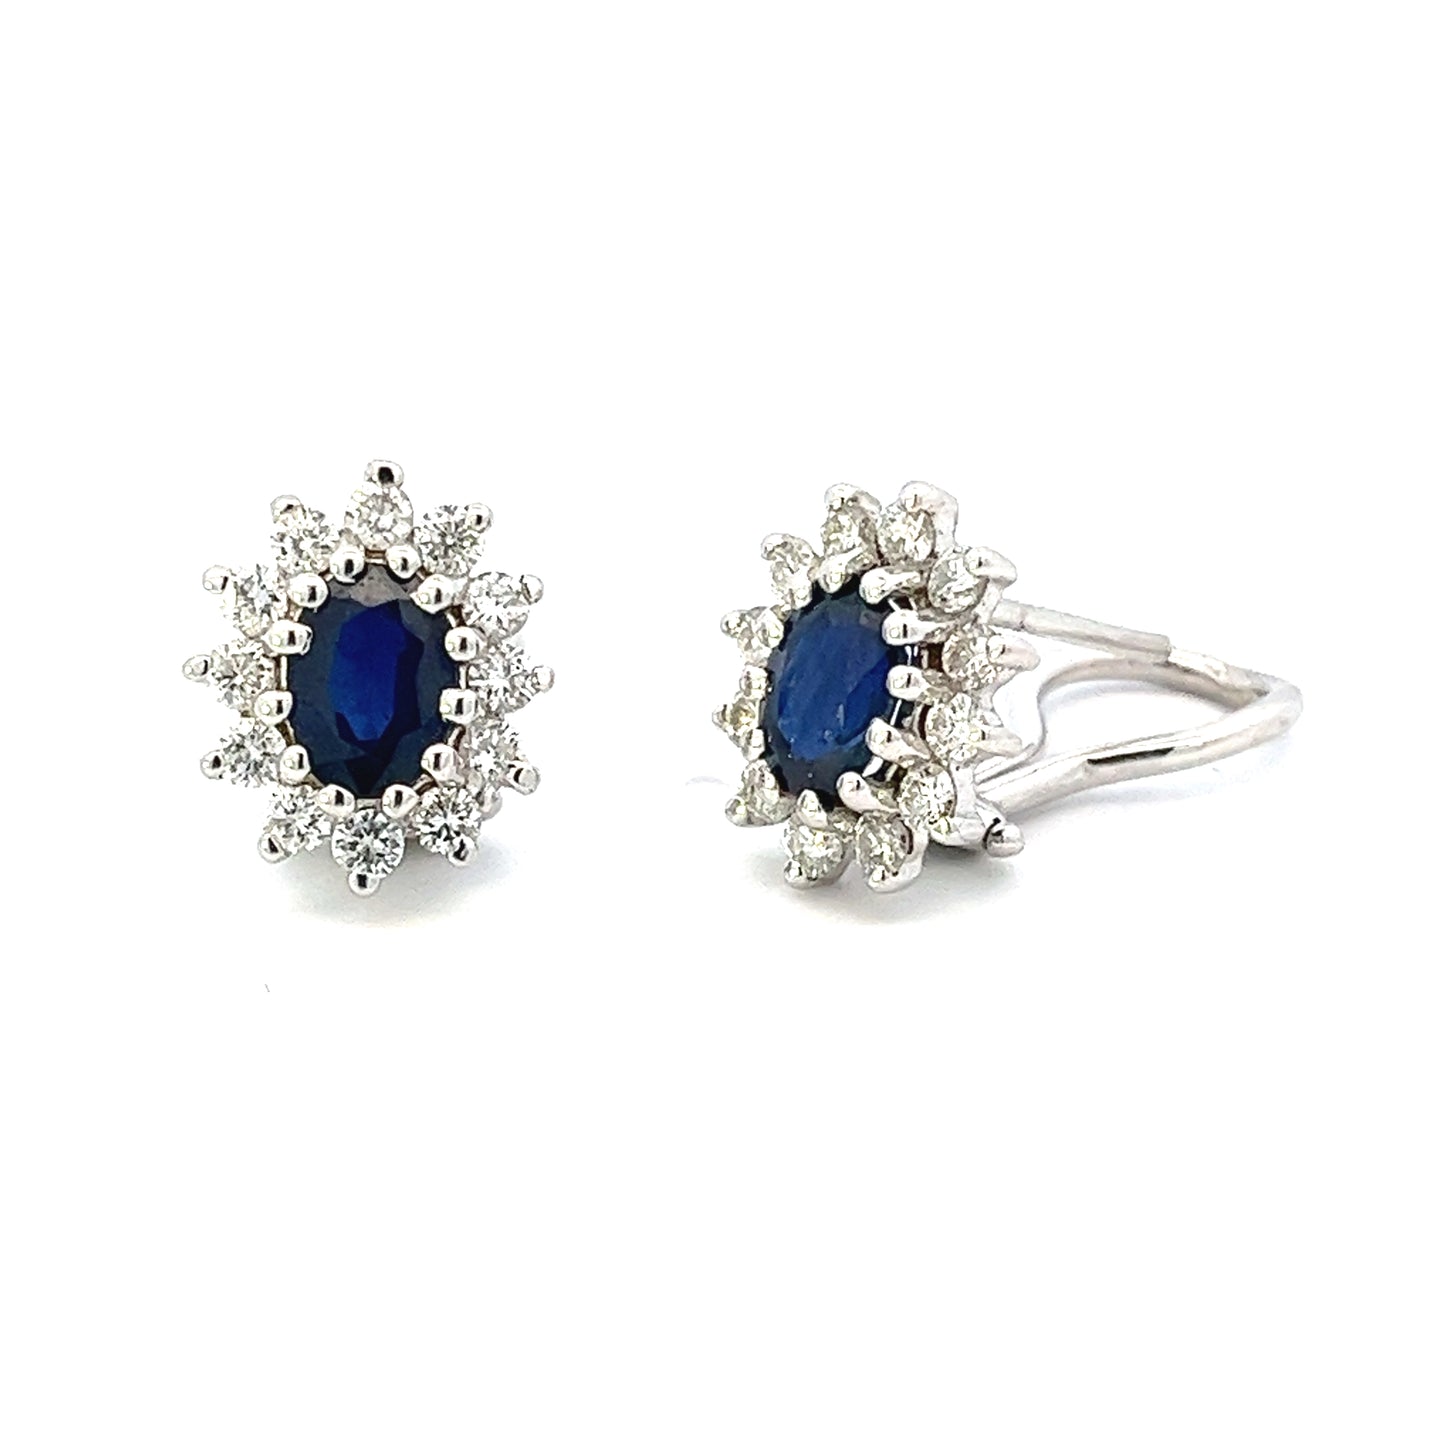 2.08ct total weight sapphire and 0.95ct total weight diamond earrings